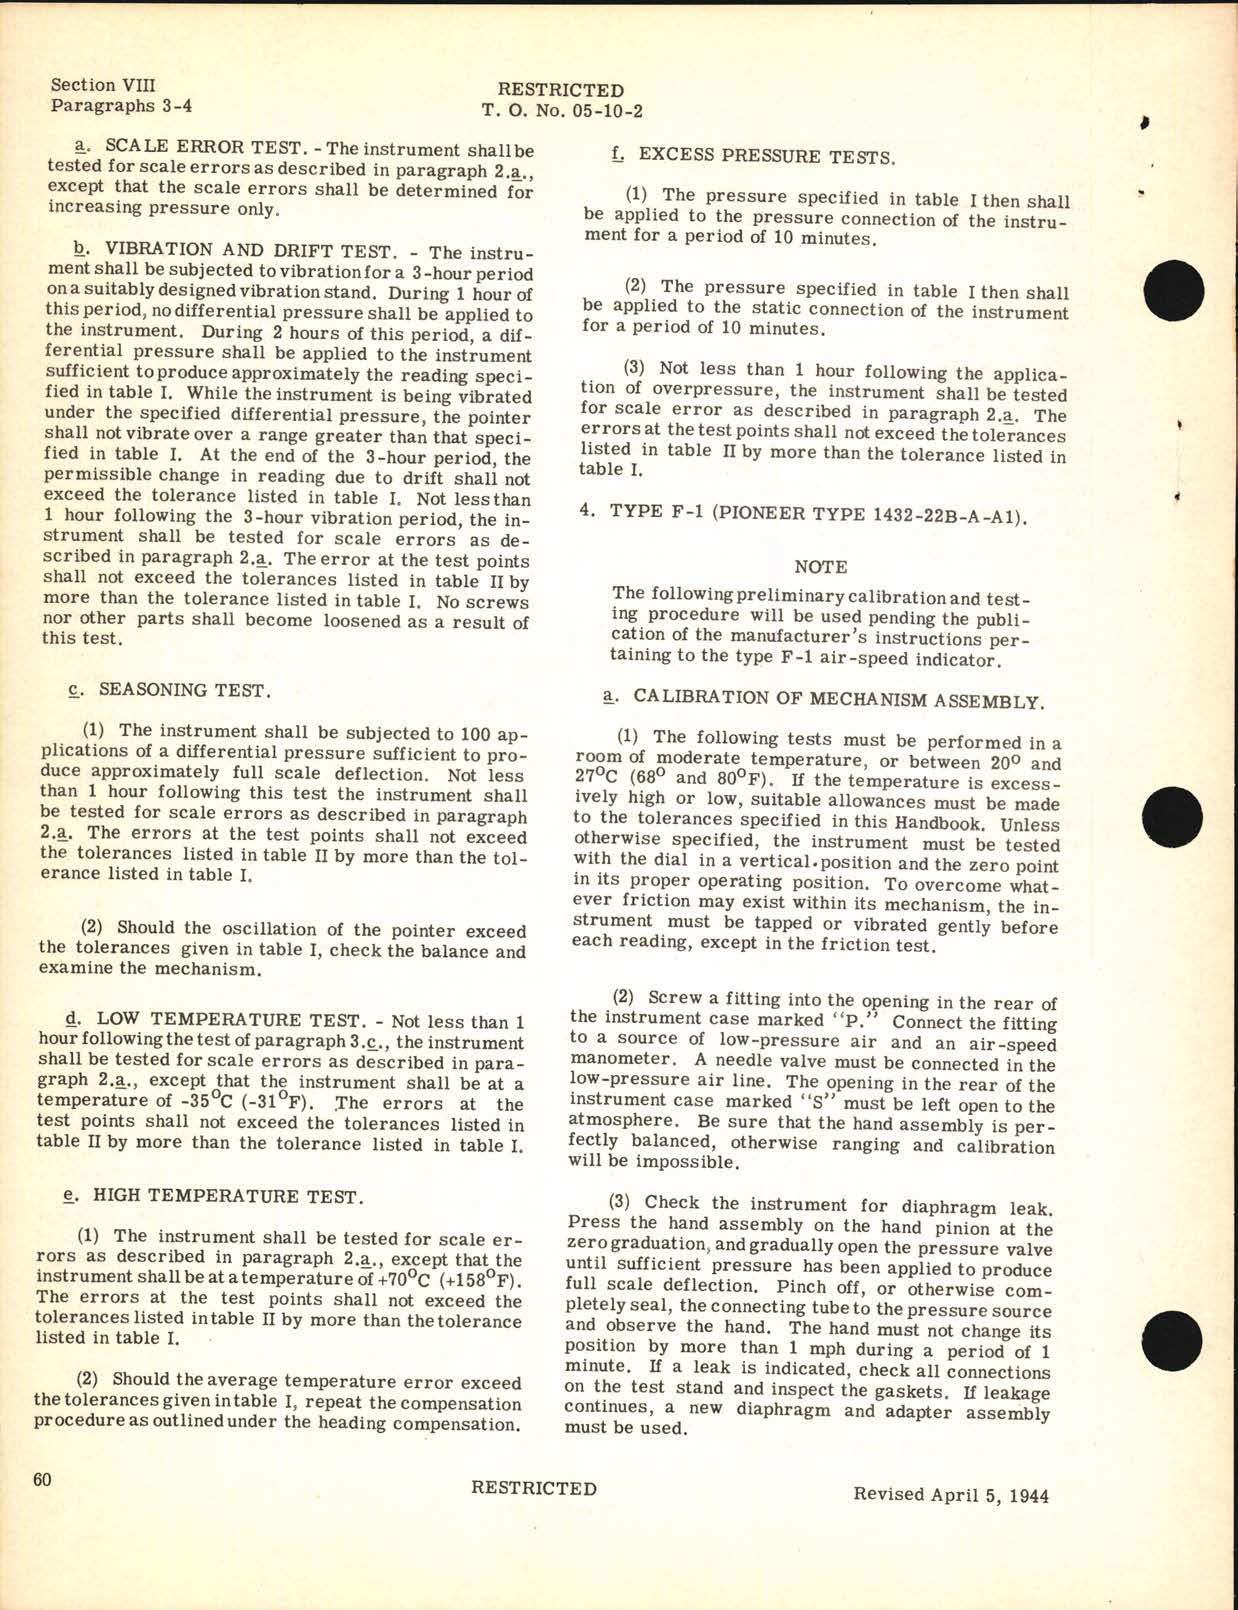 Sample page 8 from AirCorps Library document: Handbook of Instructions for Air-Speed Indicators